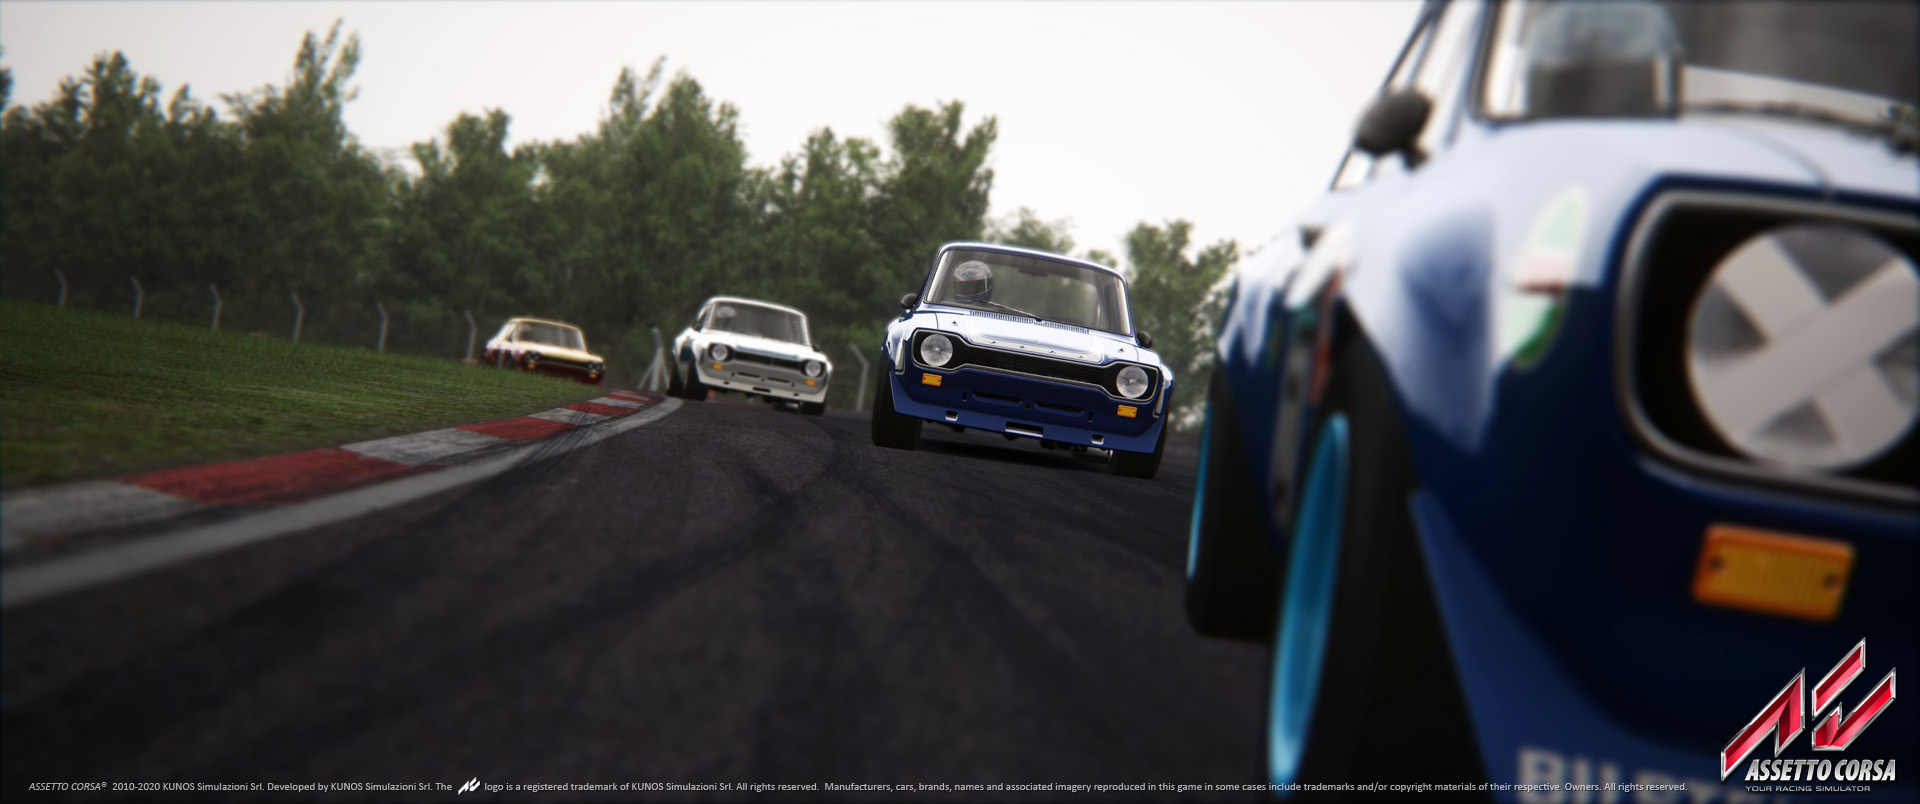 Assetto Corsa - Dream Pack 3 Images 